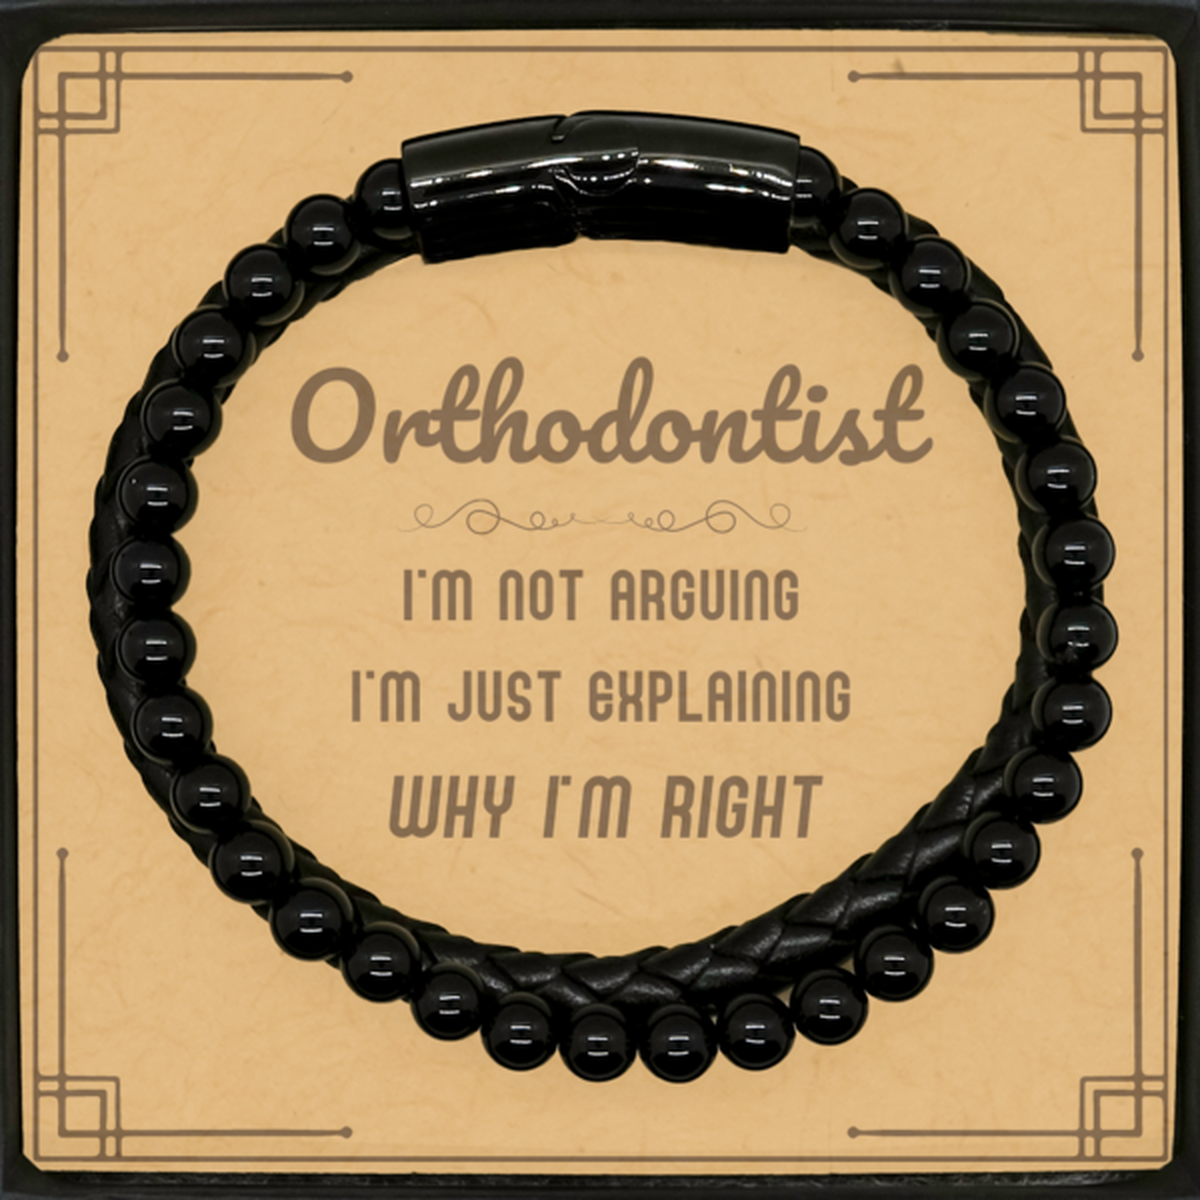 Orthodontist I'm not Arguing. I'm Just Explaining Why I'm RIGHT Stone Leather Bracelets, Funny Saying Quote Orthodontist Gifts For Orthodontist Message Card Graduation Birthday Christmas Gifts for Men Women Coworker